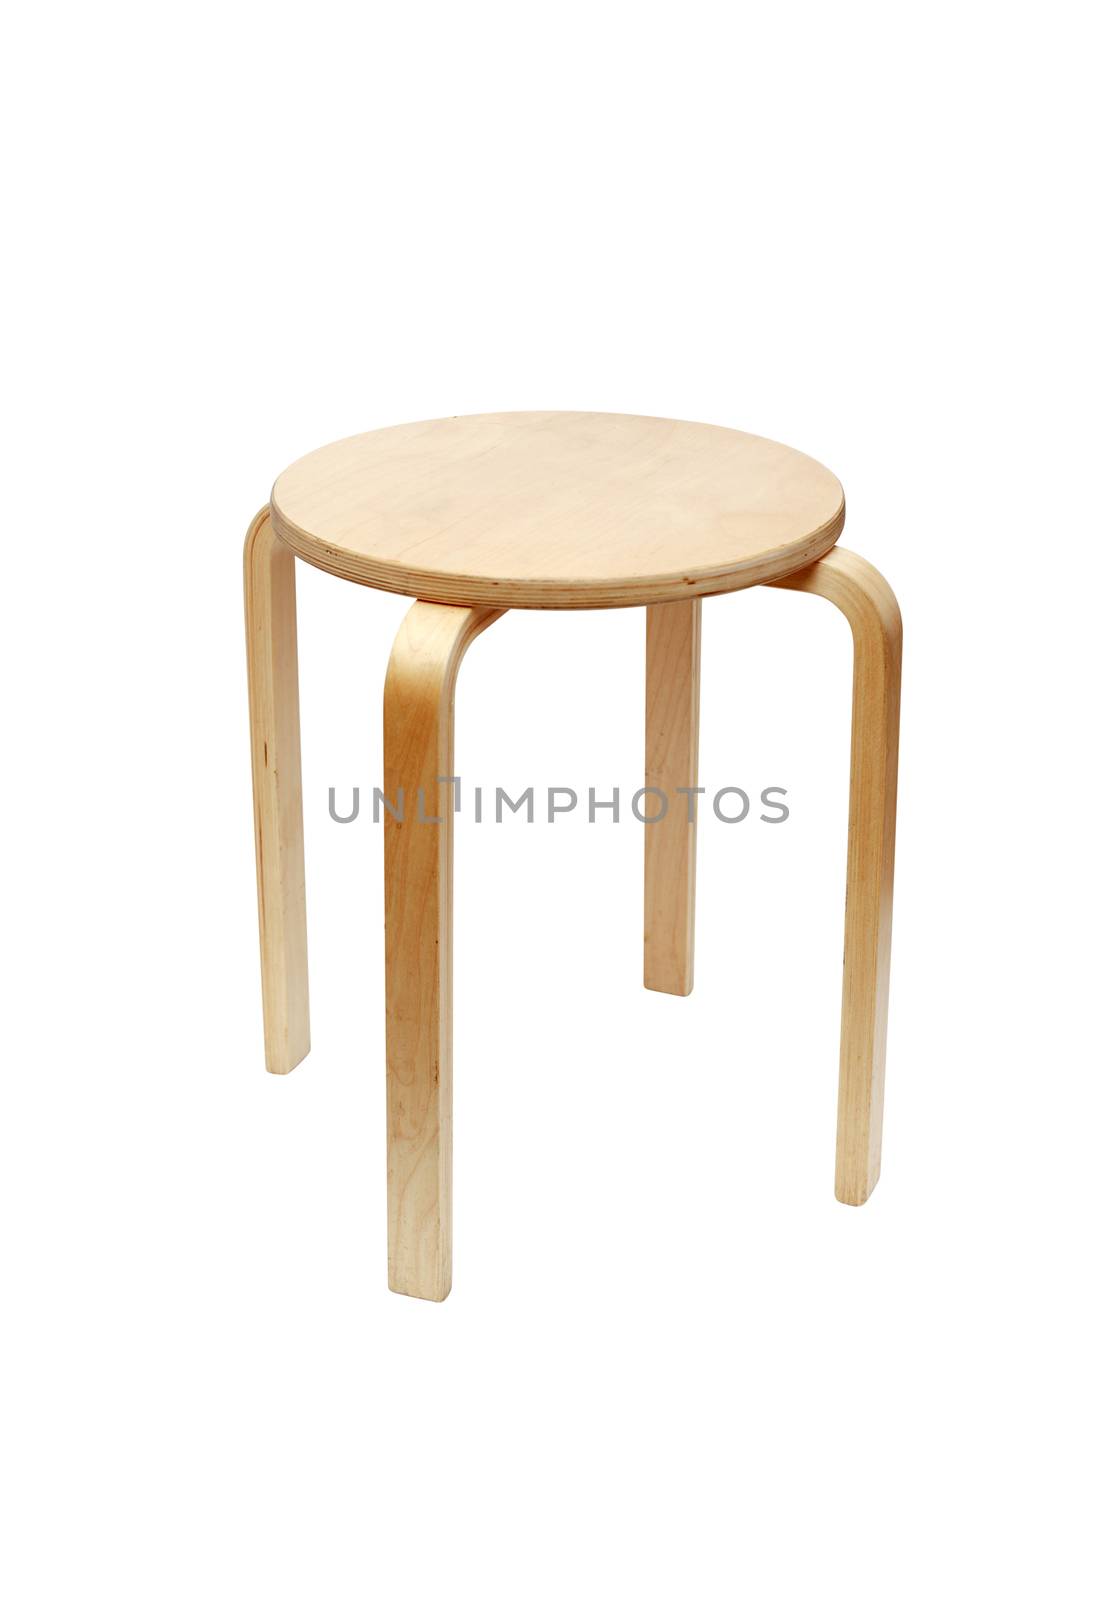 Wooden round stool isolated on white background with clipping path